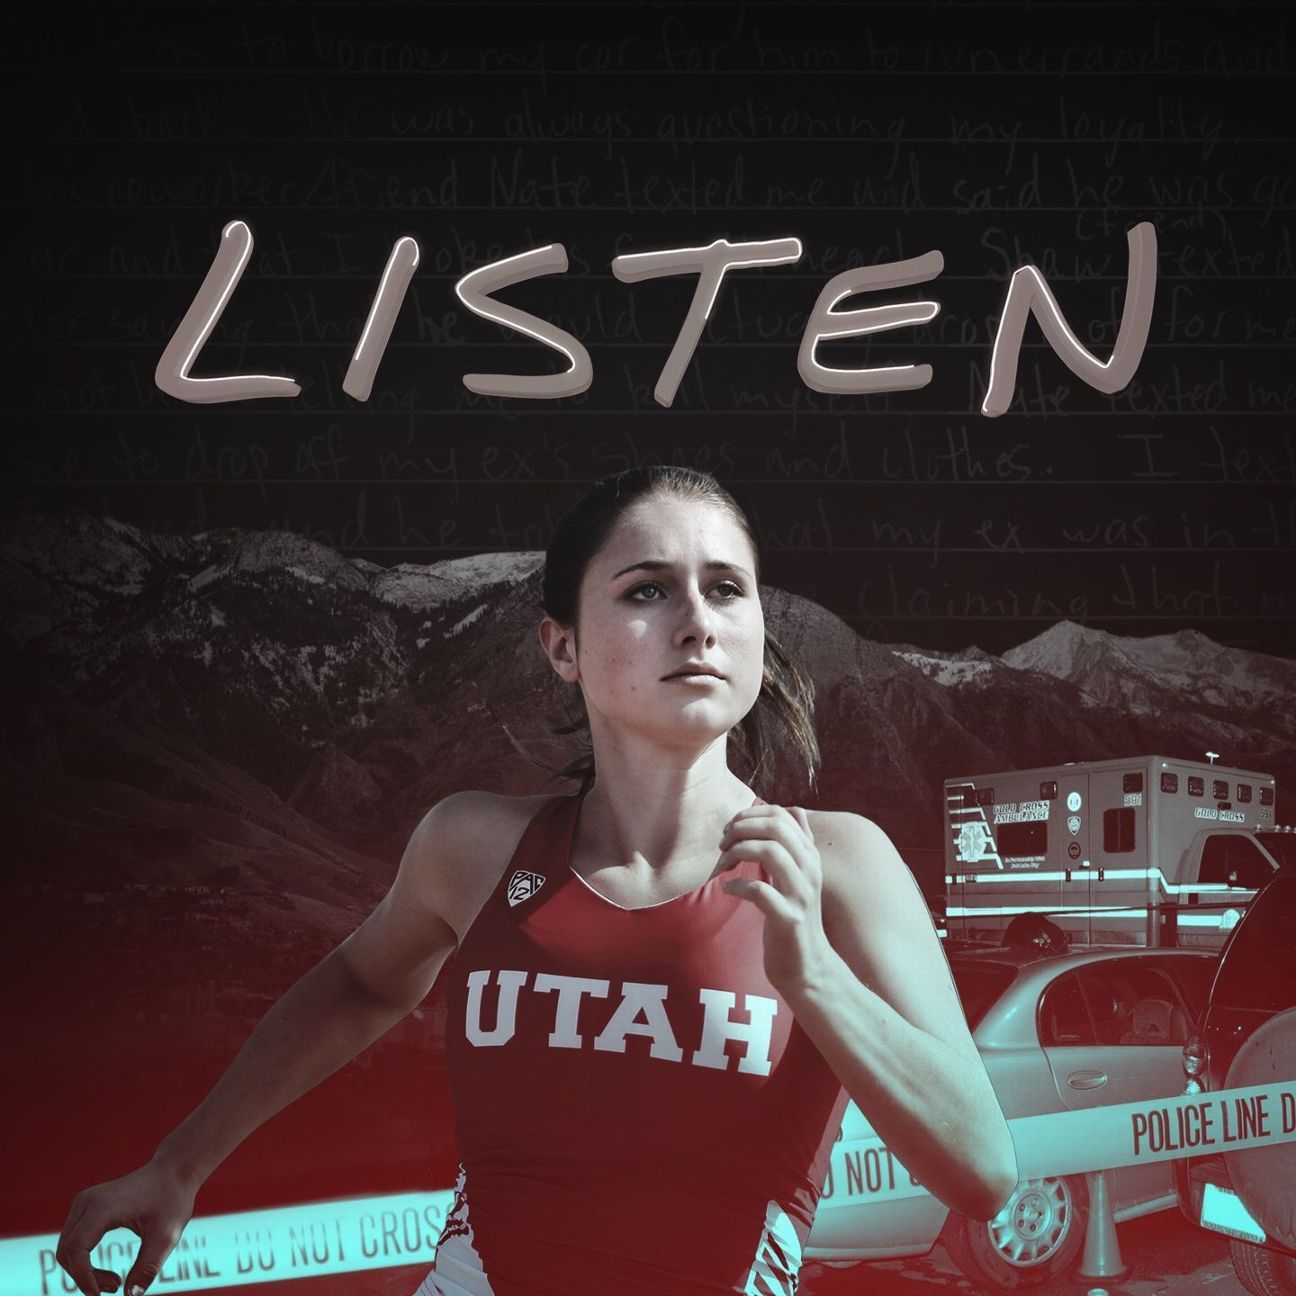 Utah Announces “Listening Session” After ESPN Documentary Airs